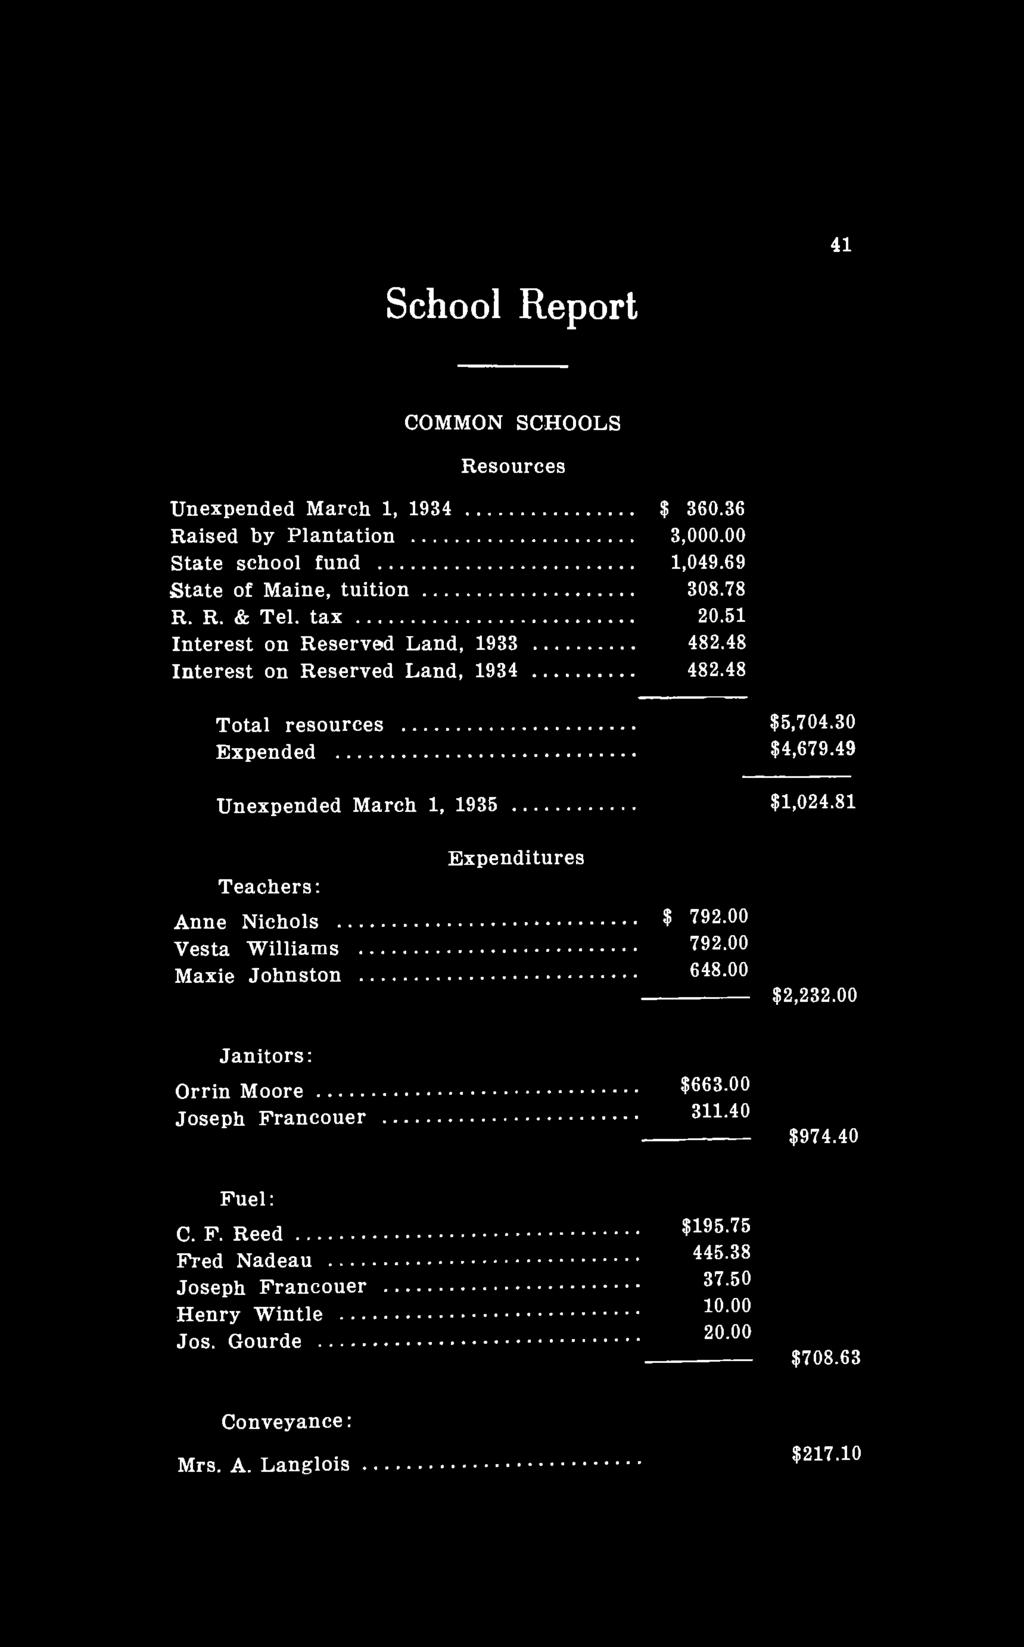 41 School Report COMMON SCHOOLS Resources Unexpended March 1, 1934 $ 3S0.36 Raised by Plantation 3,000.00 State school fund 1,049.69 State of Maine, tuition 308.78 R. R. & Tel. tax 20.